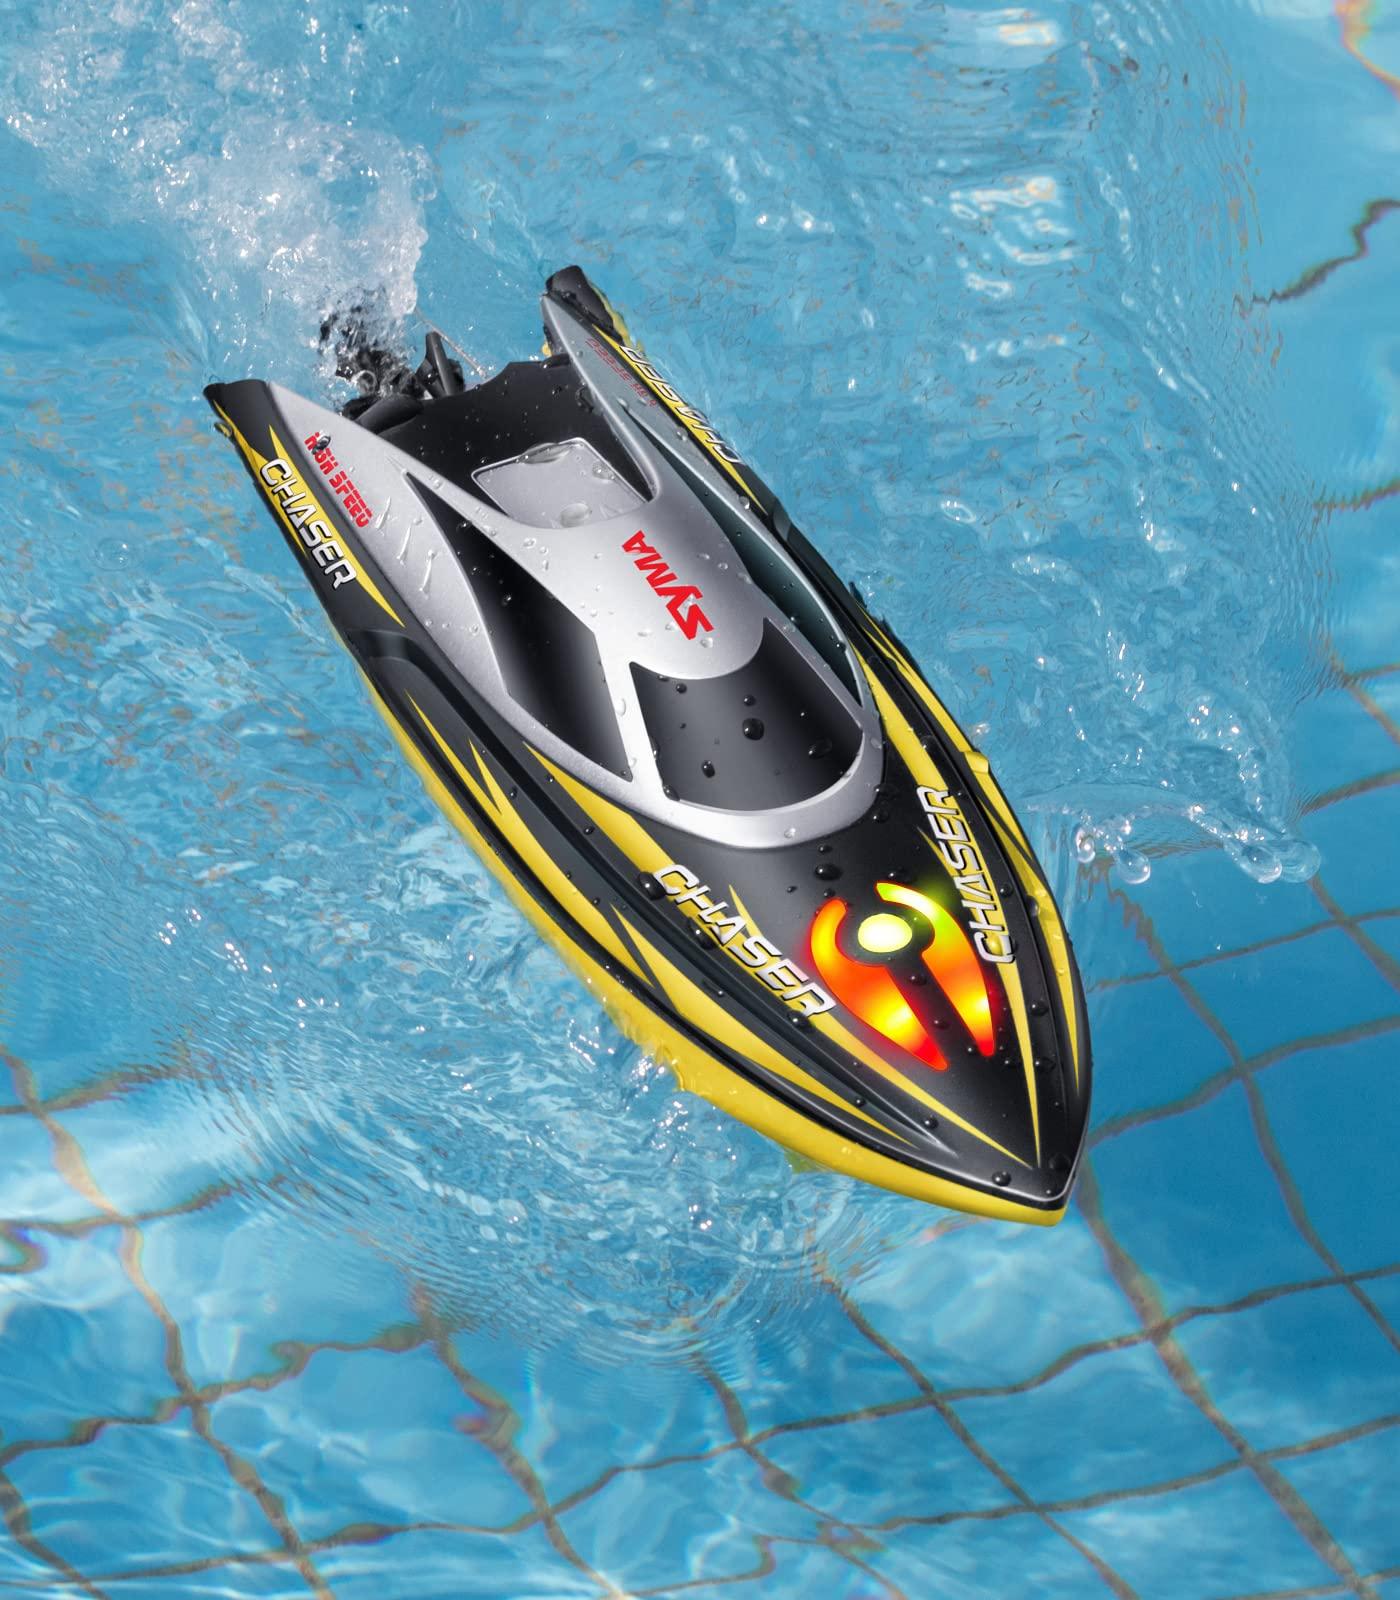 Syma Boat: User Satisfaction and Affordability: The Advantages of Syma Boats